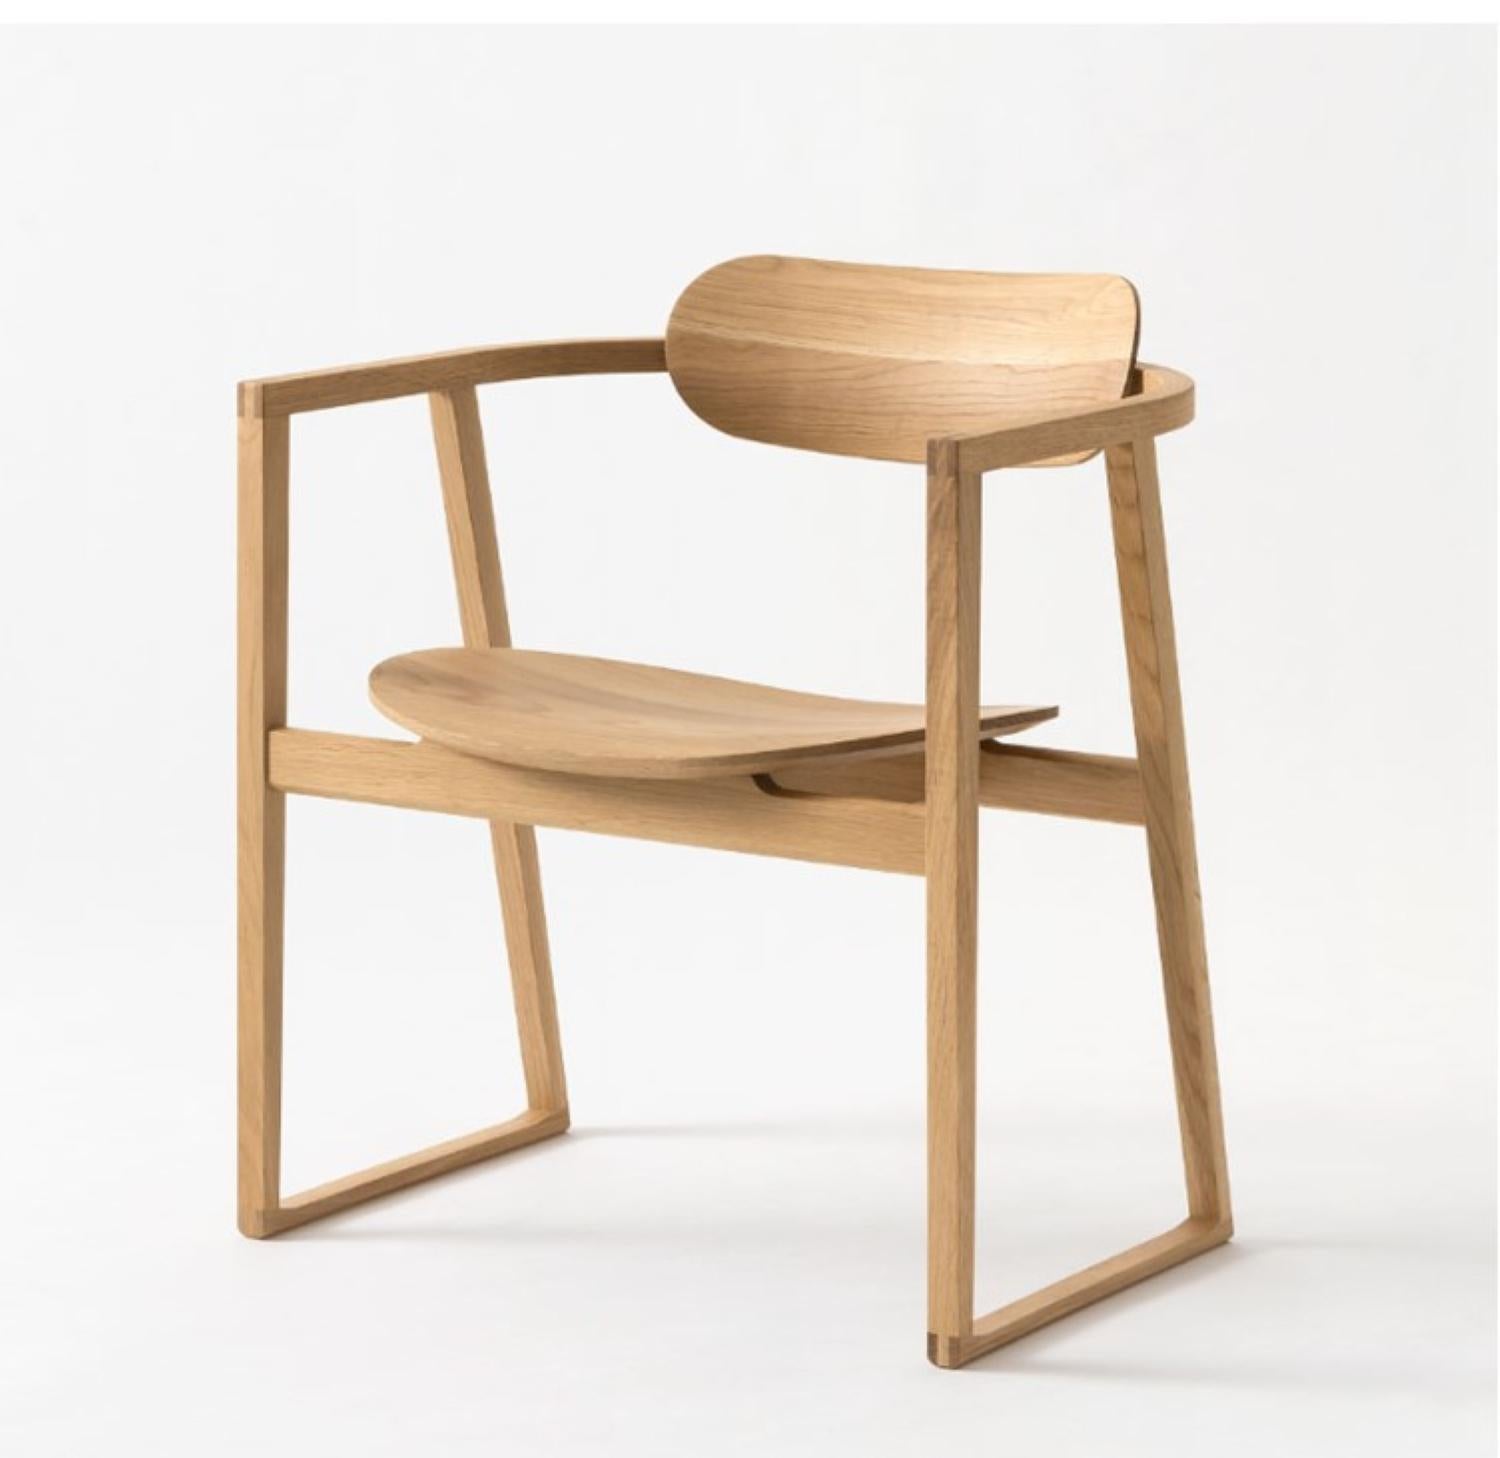 A truly beautiful lounge chair hand crafted in solid oak by HIDA Japan.  The Suwari series is designed with an awareness of vertical flow, blending naturally into both Japanese and modern architectural spaces, and enhancing them.
The weighted design